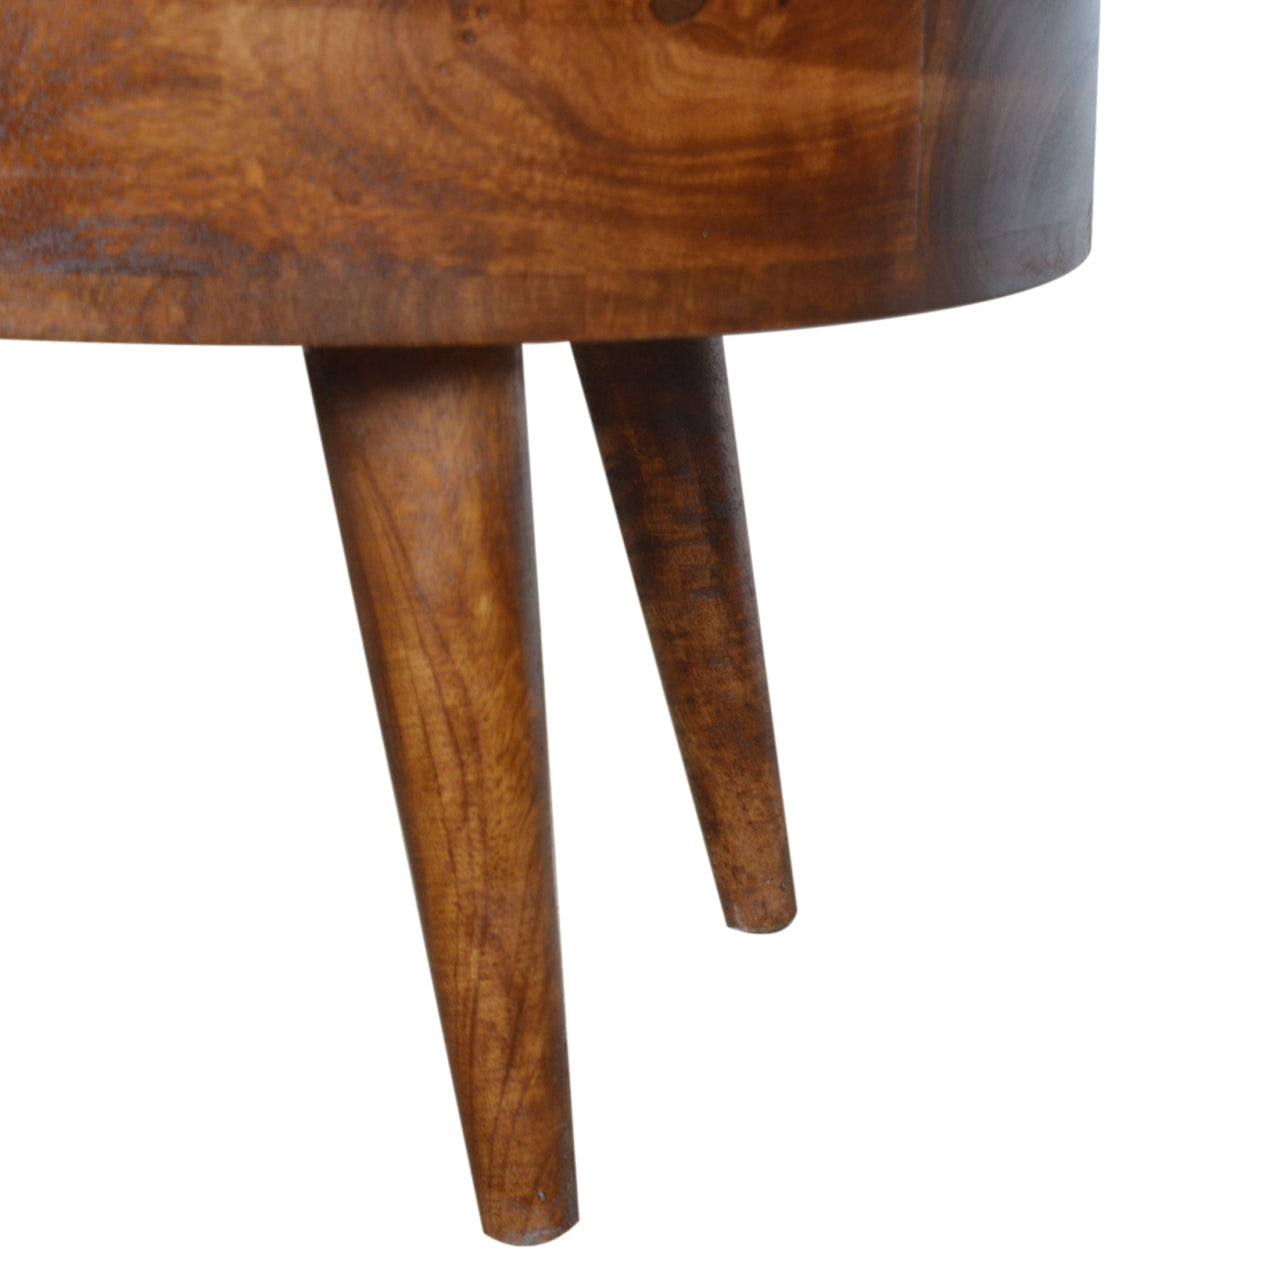 Chestnut Wood Rounded Coffee Table